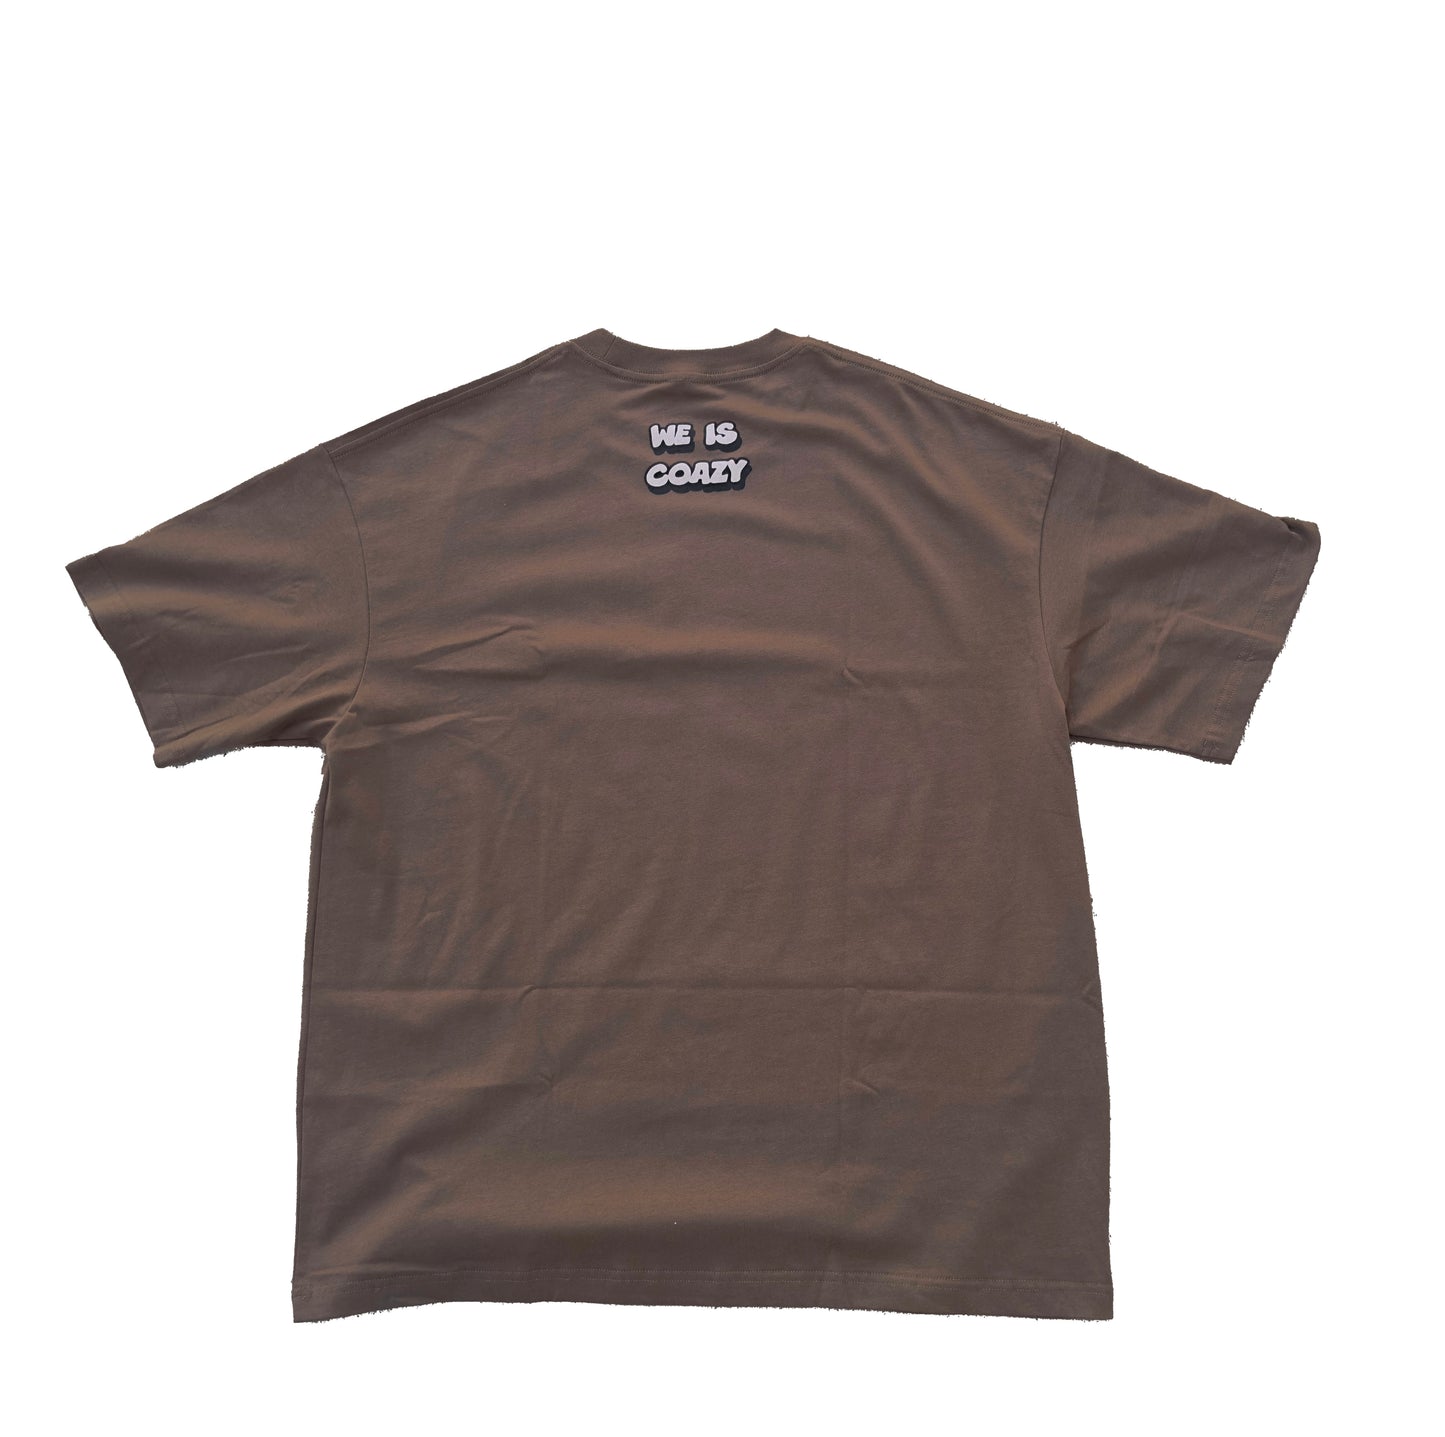 WESCOAZY BROWN T SHIRT